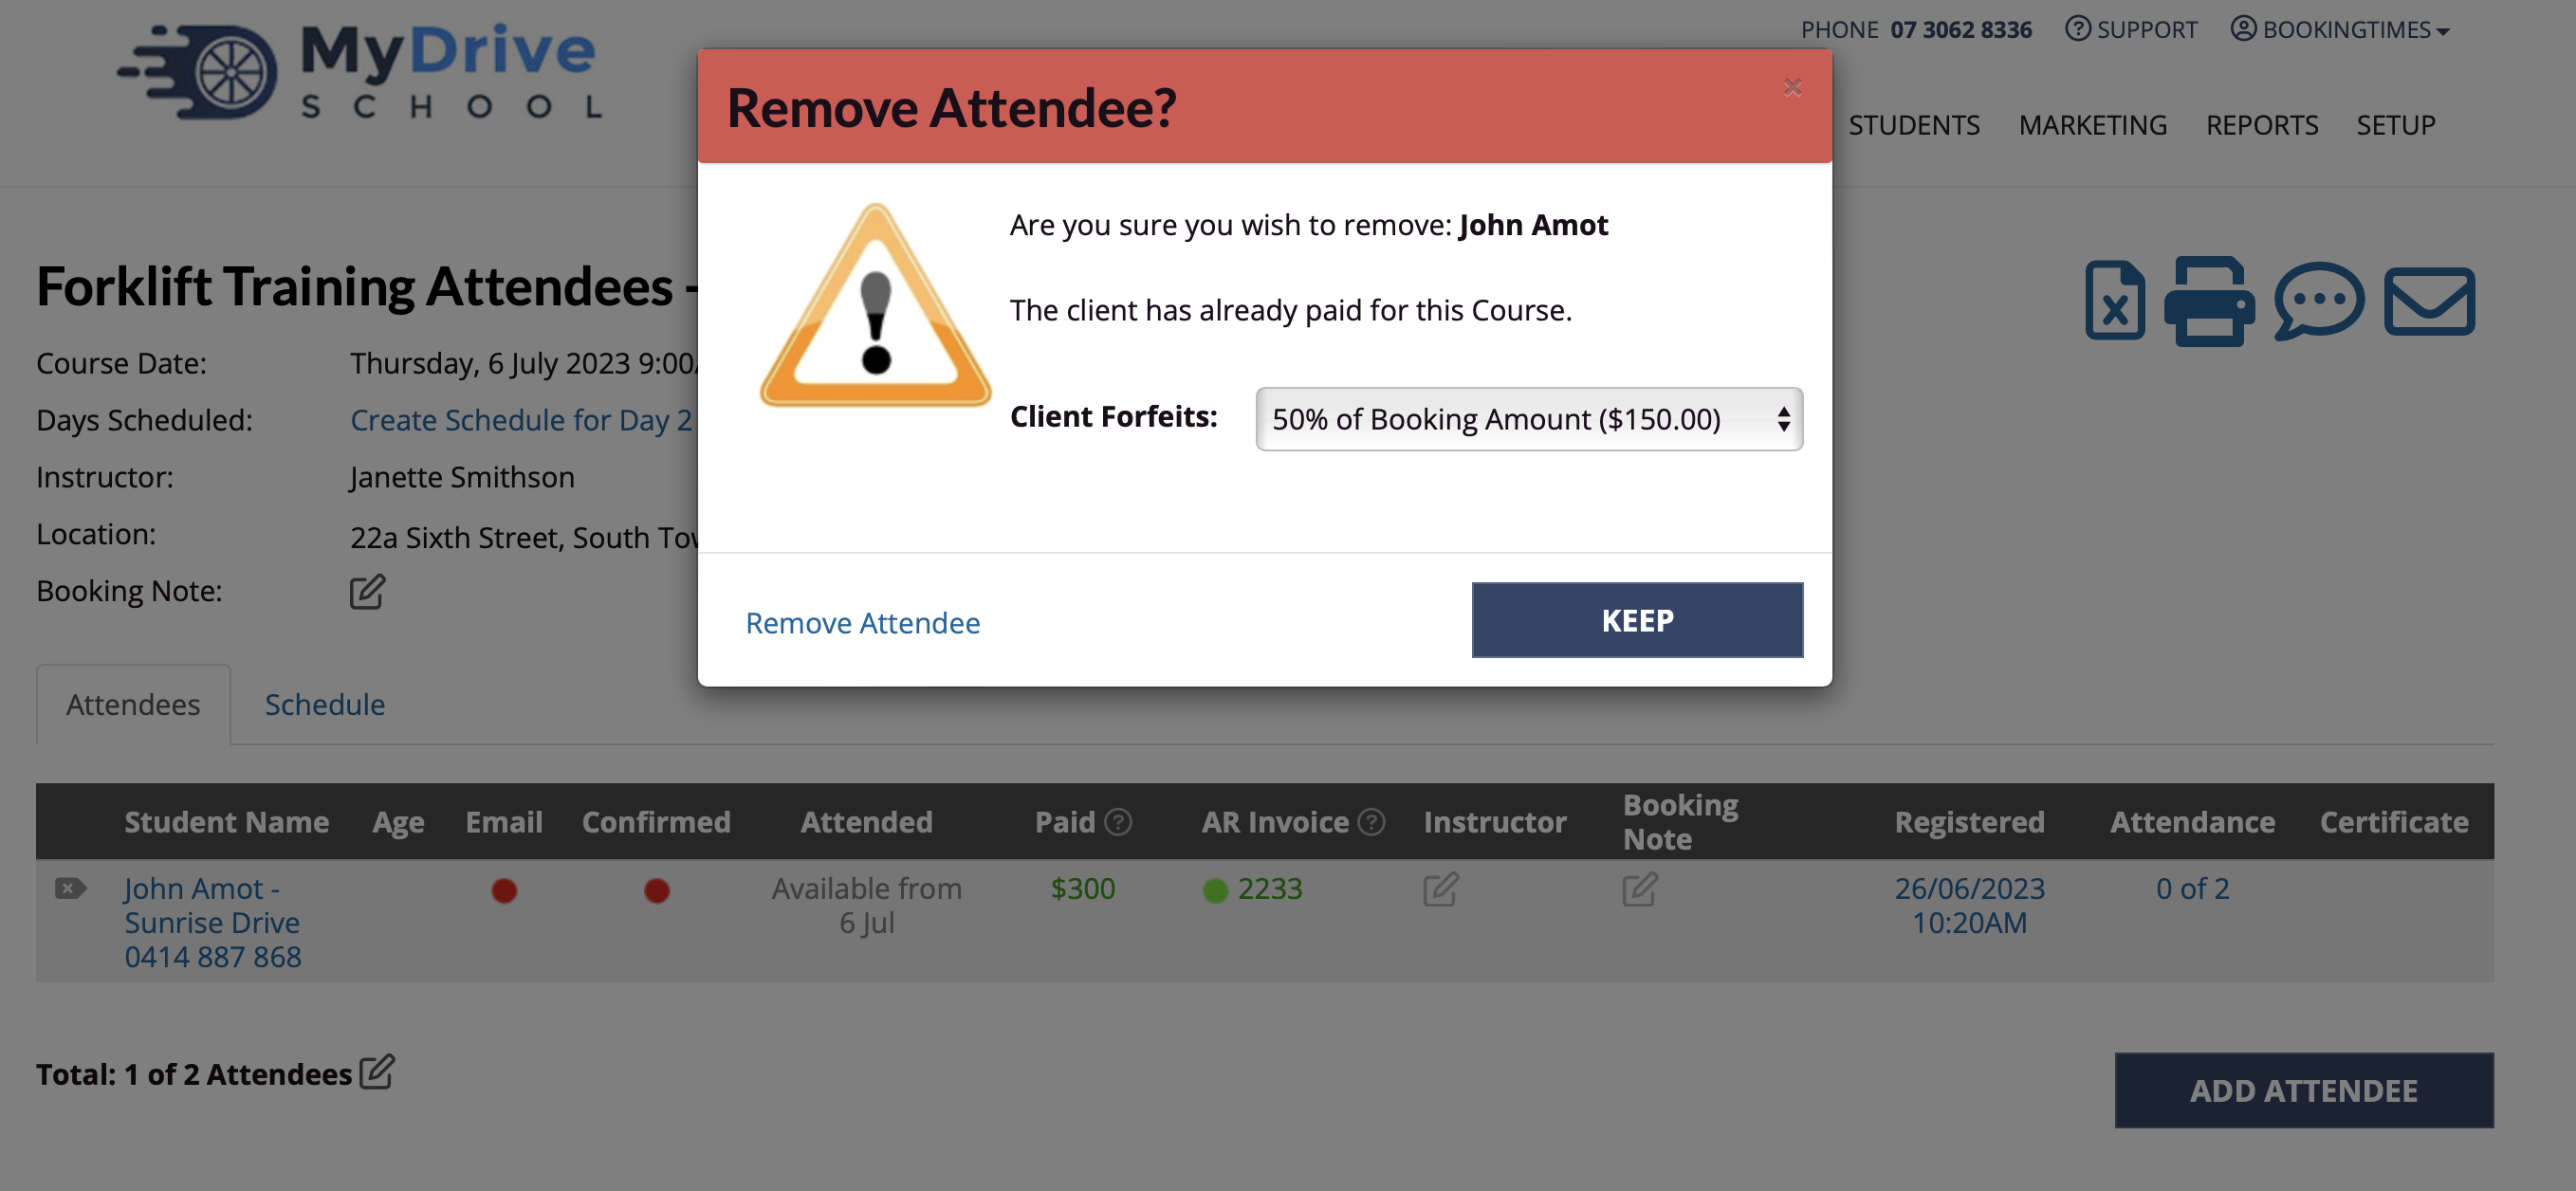 Course - remove attendee confirm